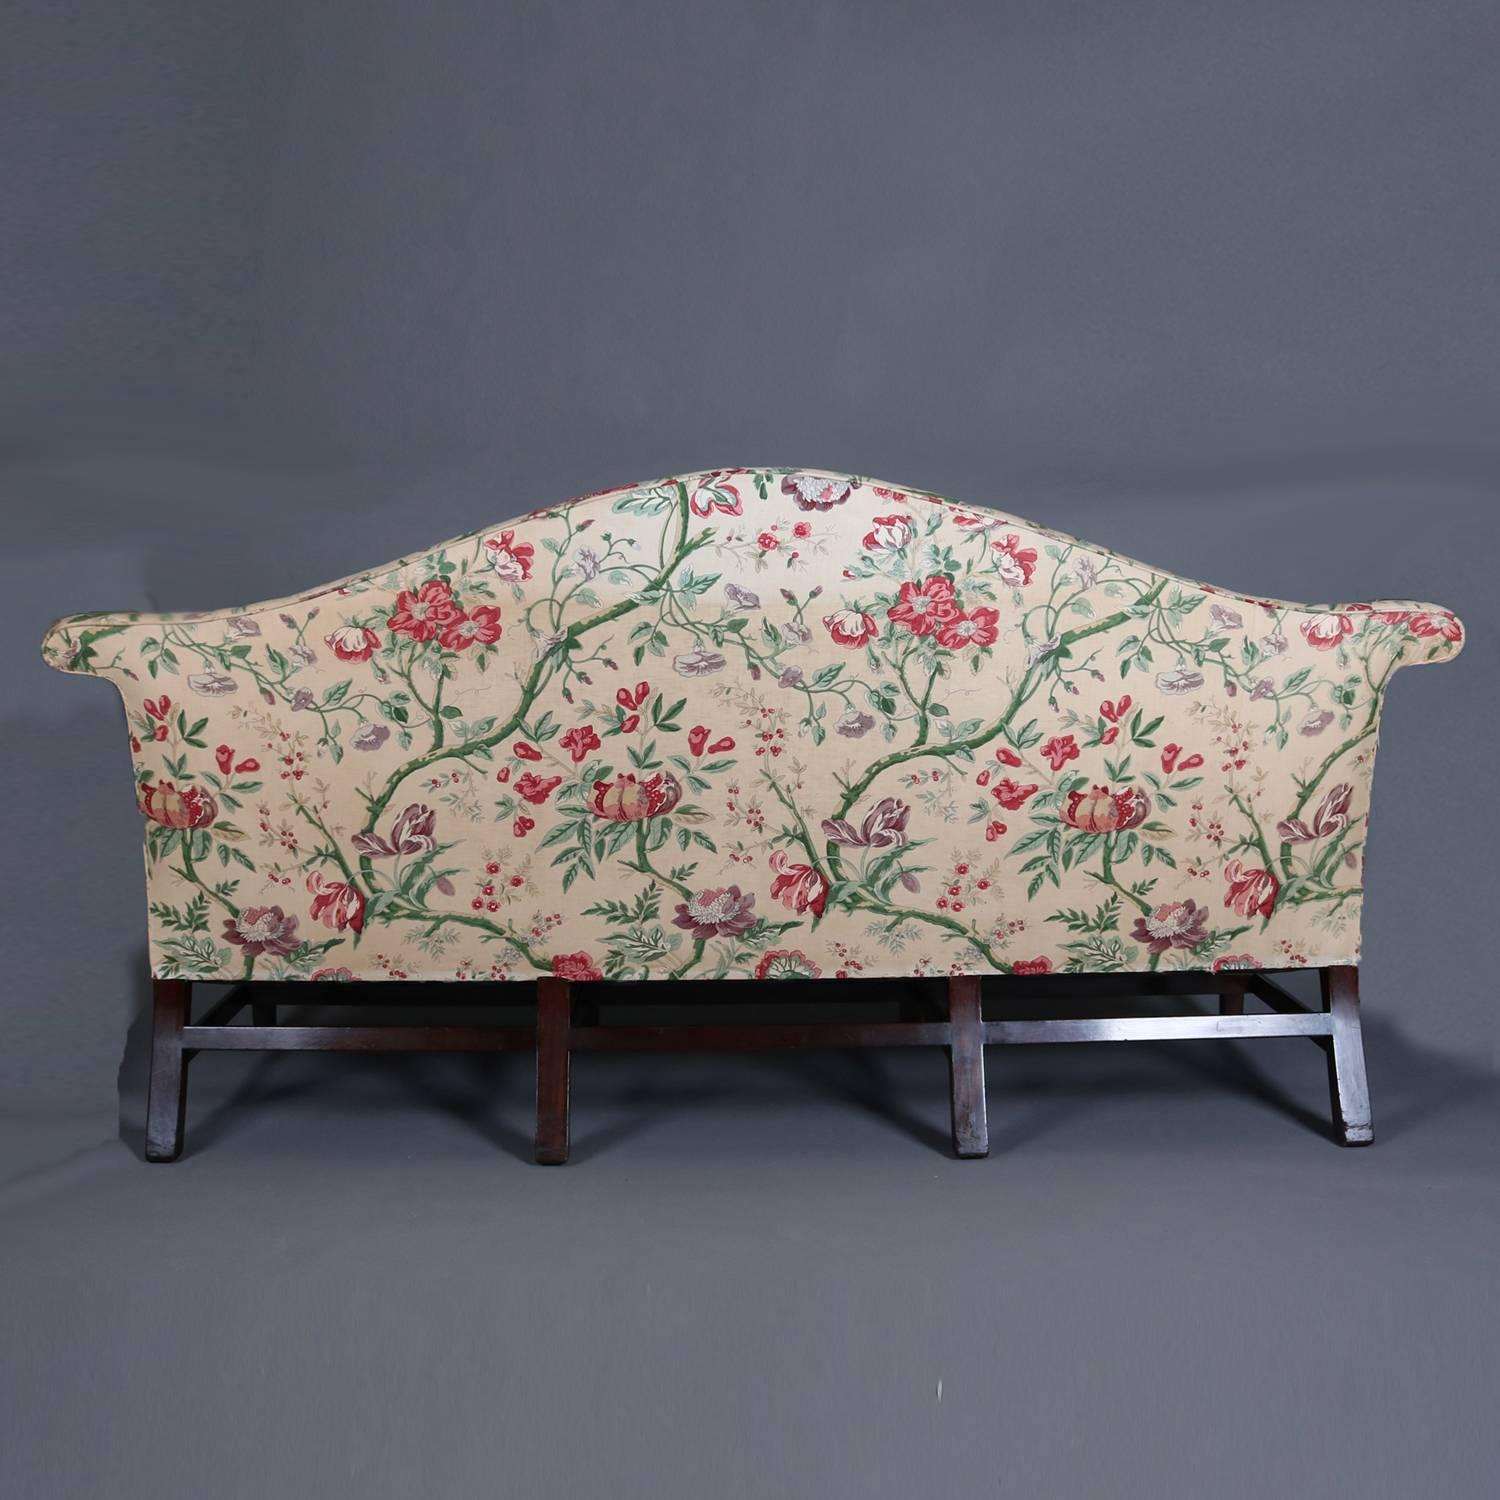 Upholstery Antique Sheraton Floral Chintz Upholstered Camel Back Sofa, 20th Century